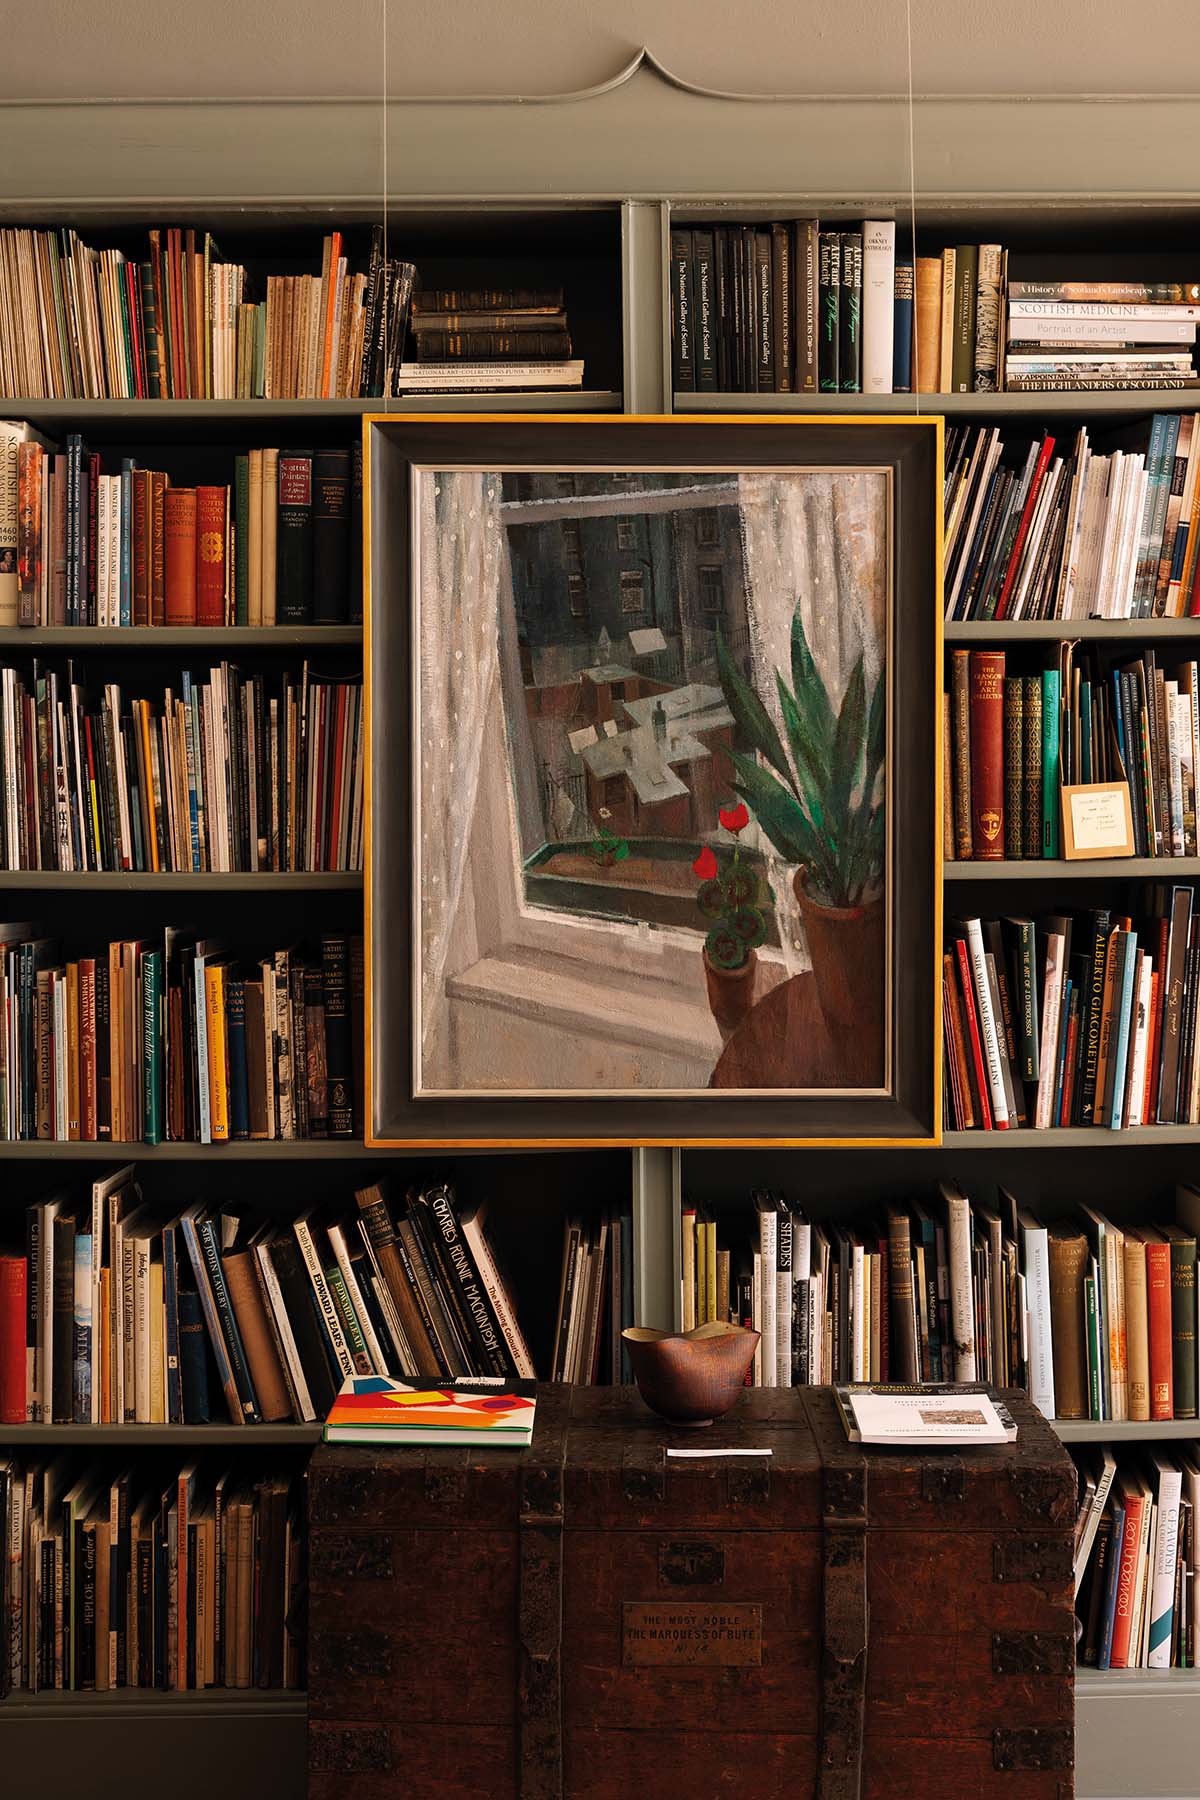 A painting displayed against the backdrop of bookshelves